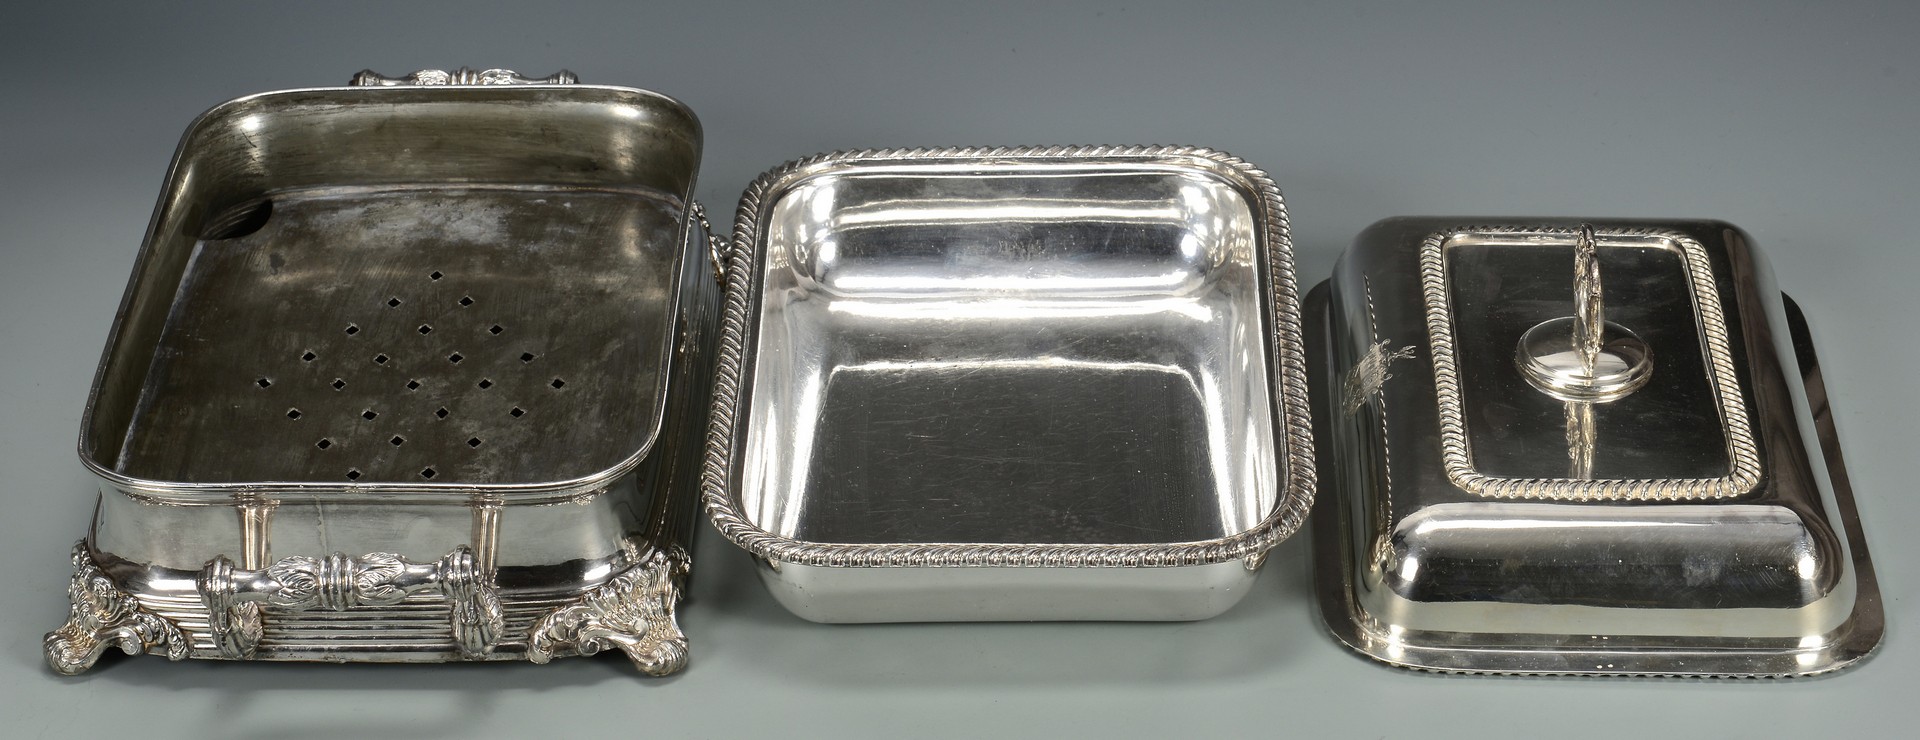 Lot 833: Two William IV Plated Serving Items